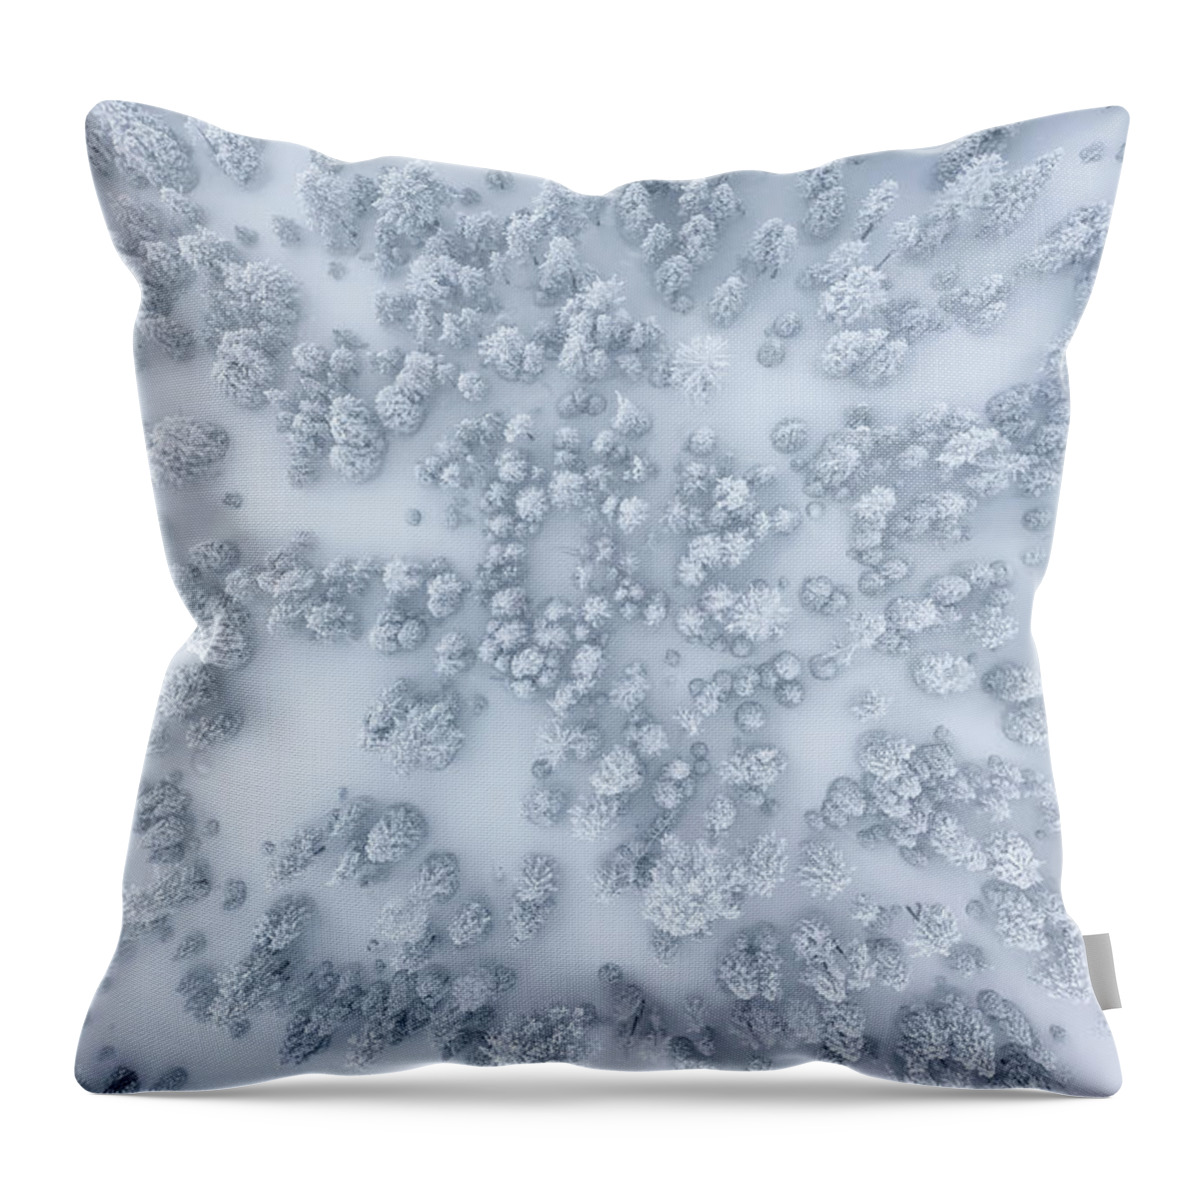 Aerial Throw Pillow featuring the photograph Snowy Forest by Steve Berkley